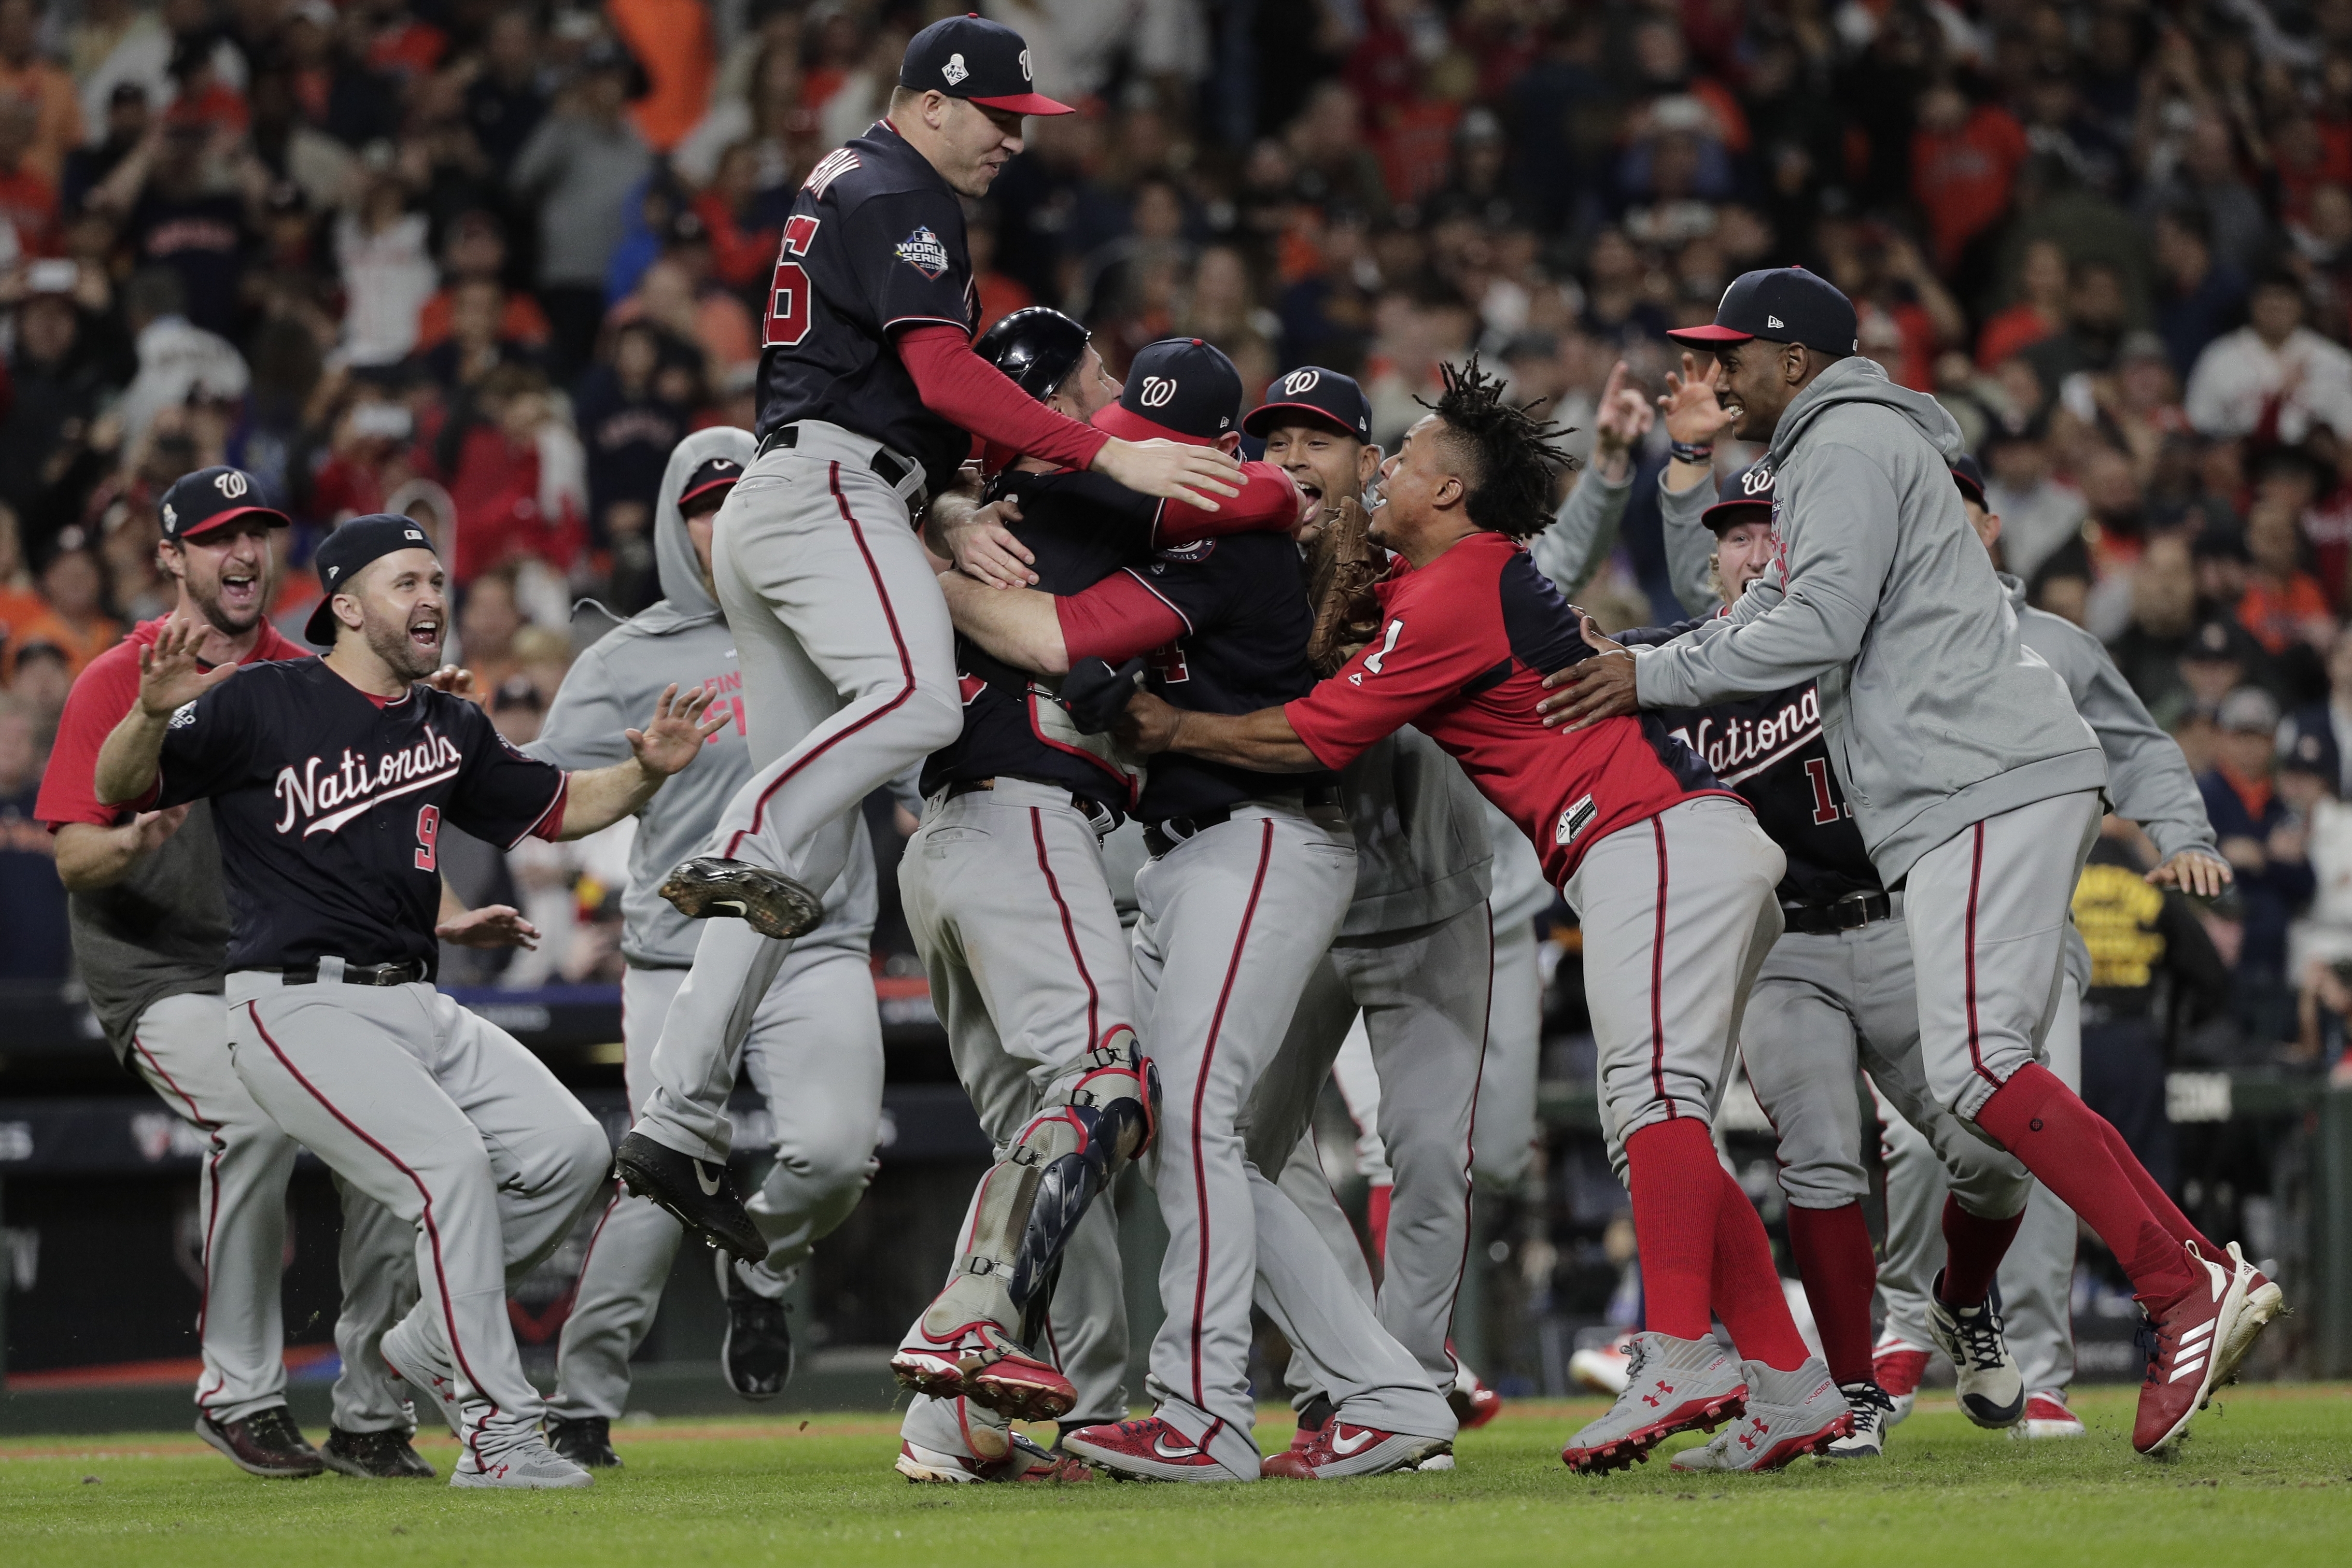 Nationals vs. Astros in 2019 World Series on Fox